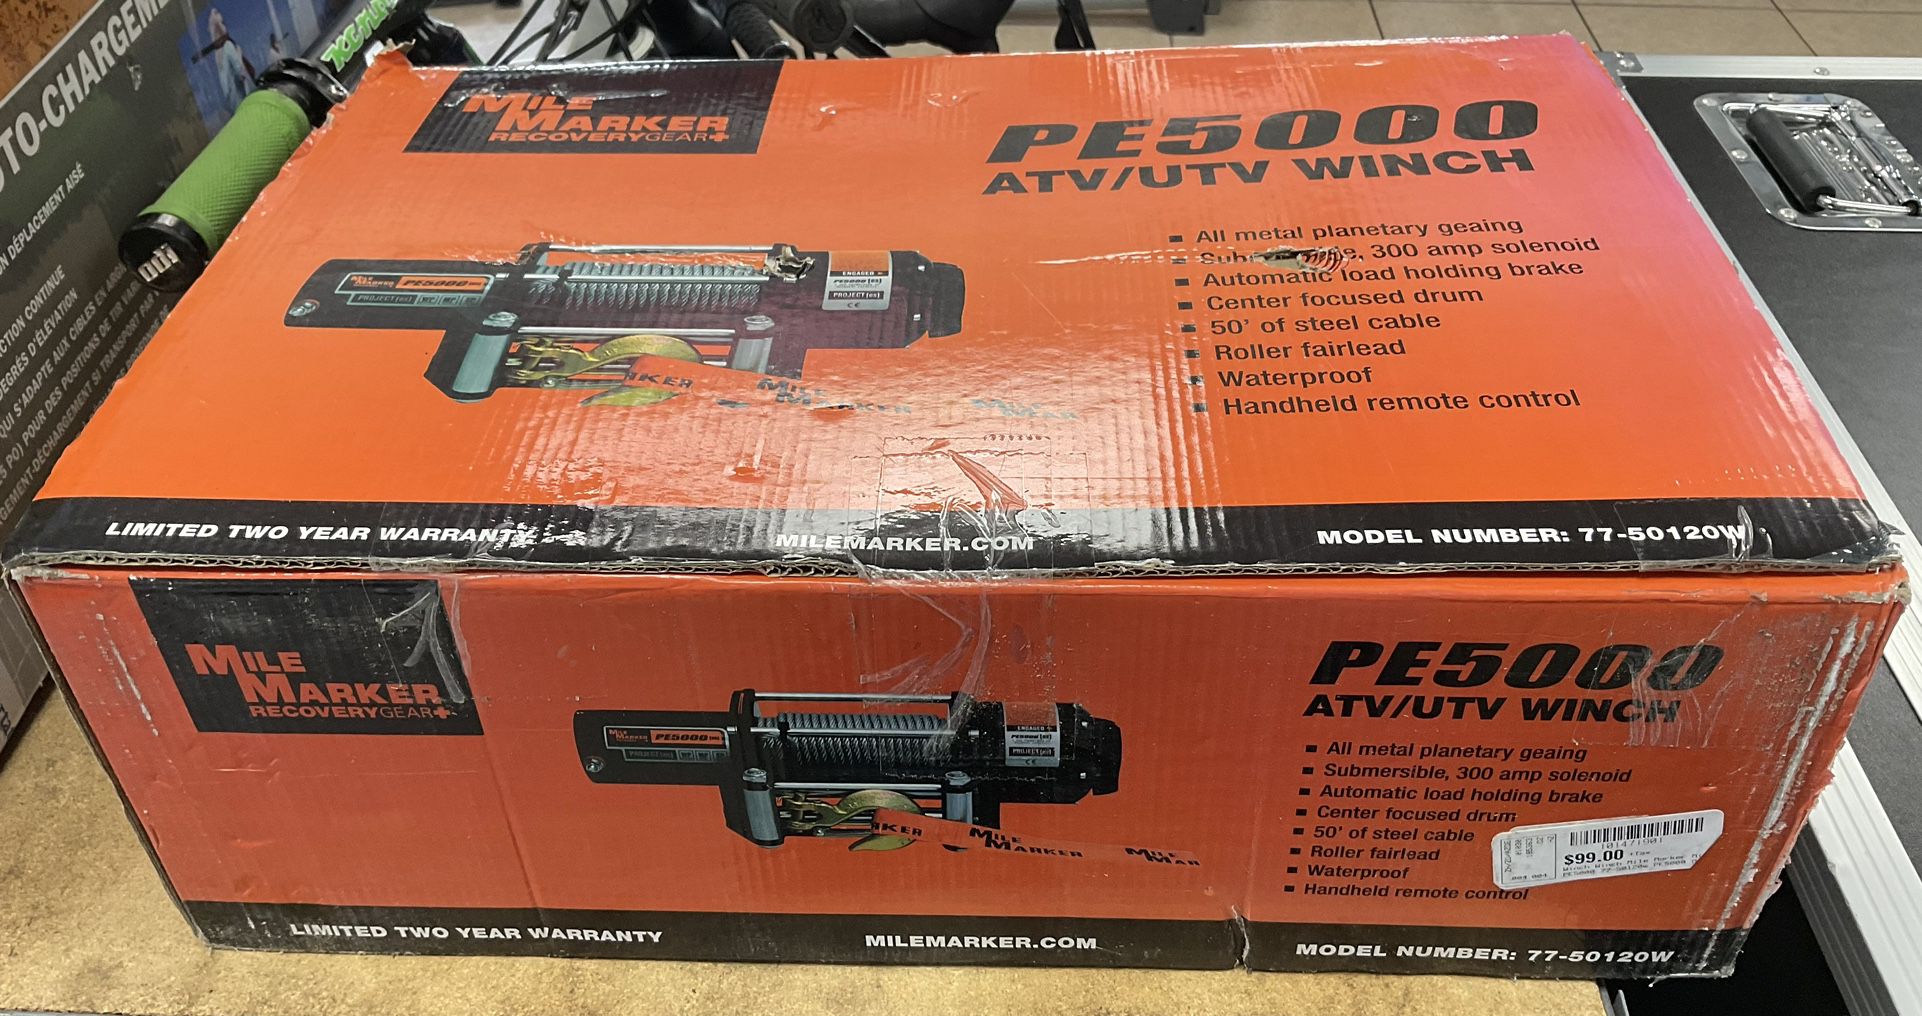 Mile Marker Winch PE5000 (capable Off 500lbs)